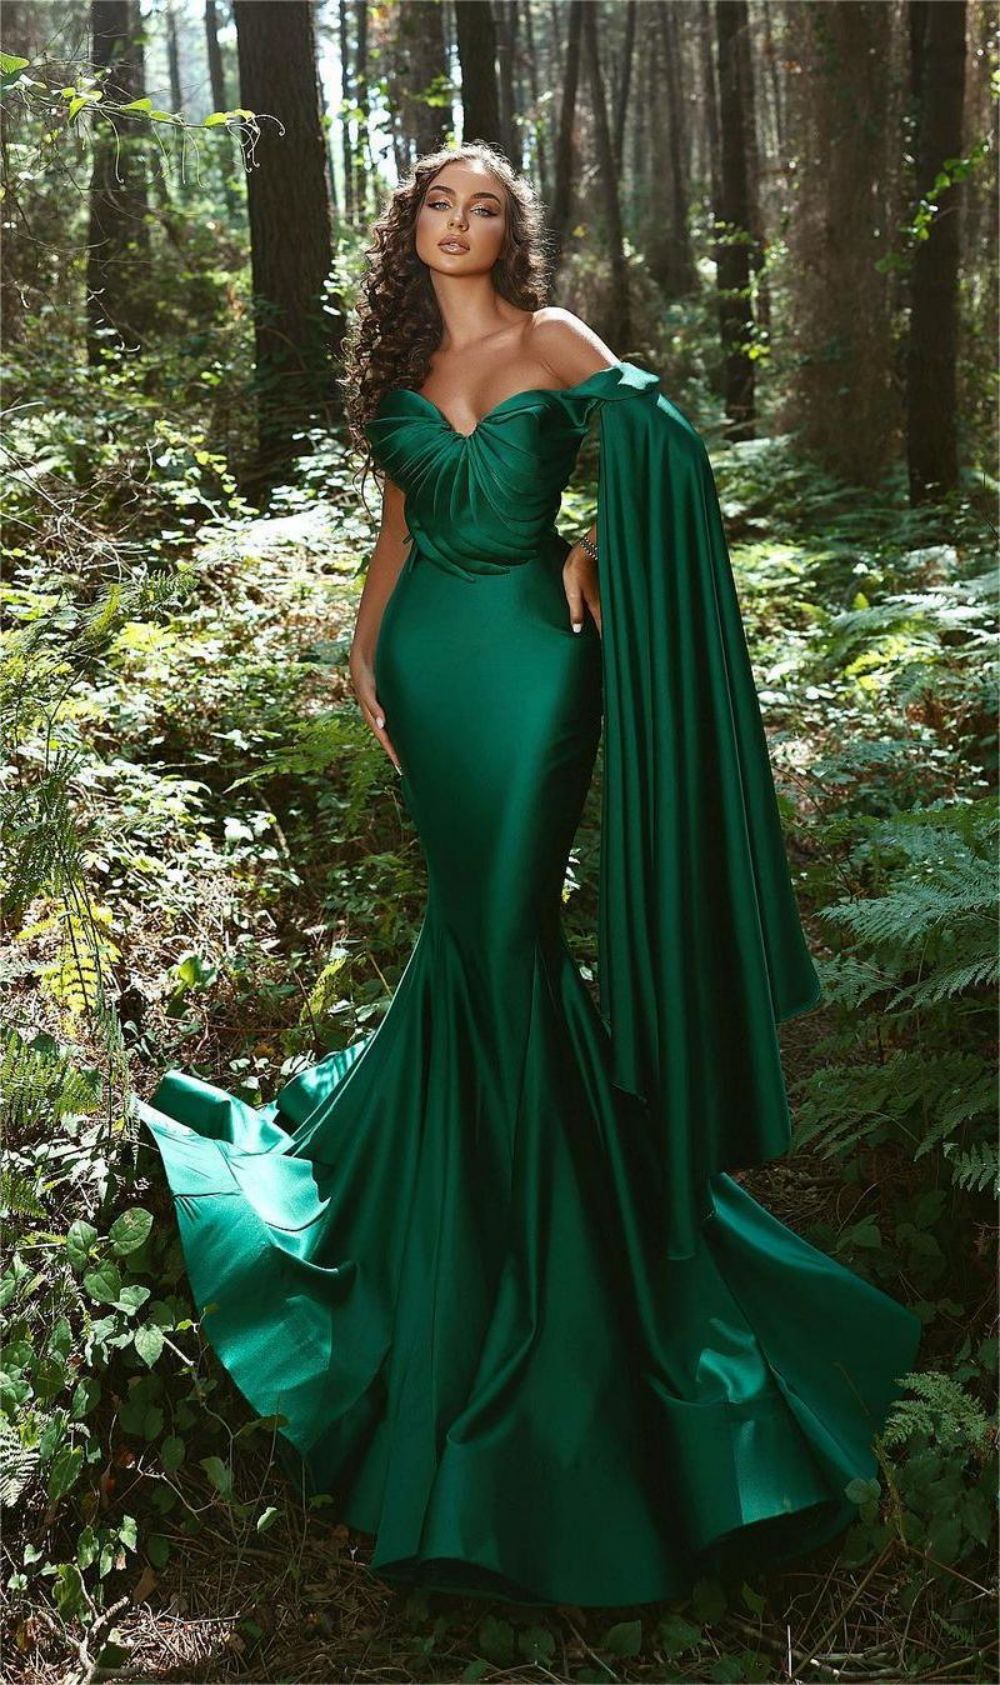 Green Indian Gowns - Buy Indian Gown online at Clothsvilla.com